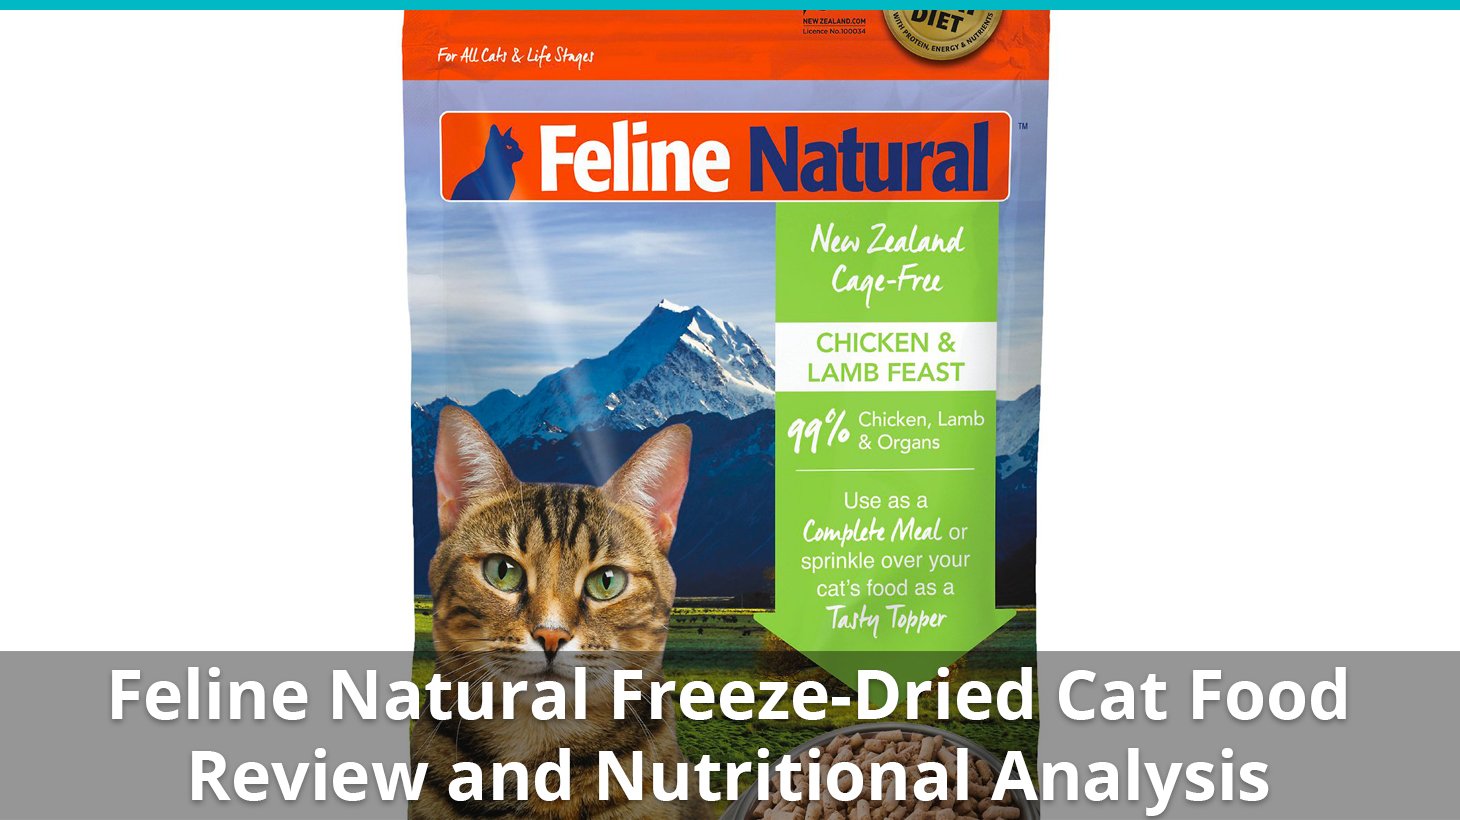 Feline Natural Cat Food (FreezeDried) Review And Nutrition Analysis